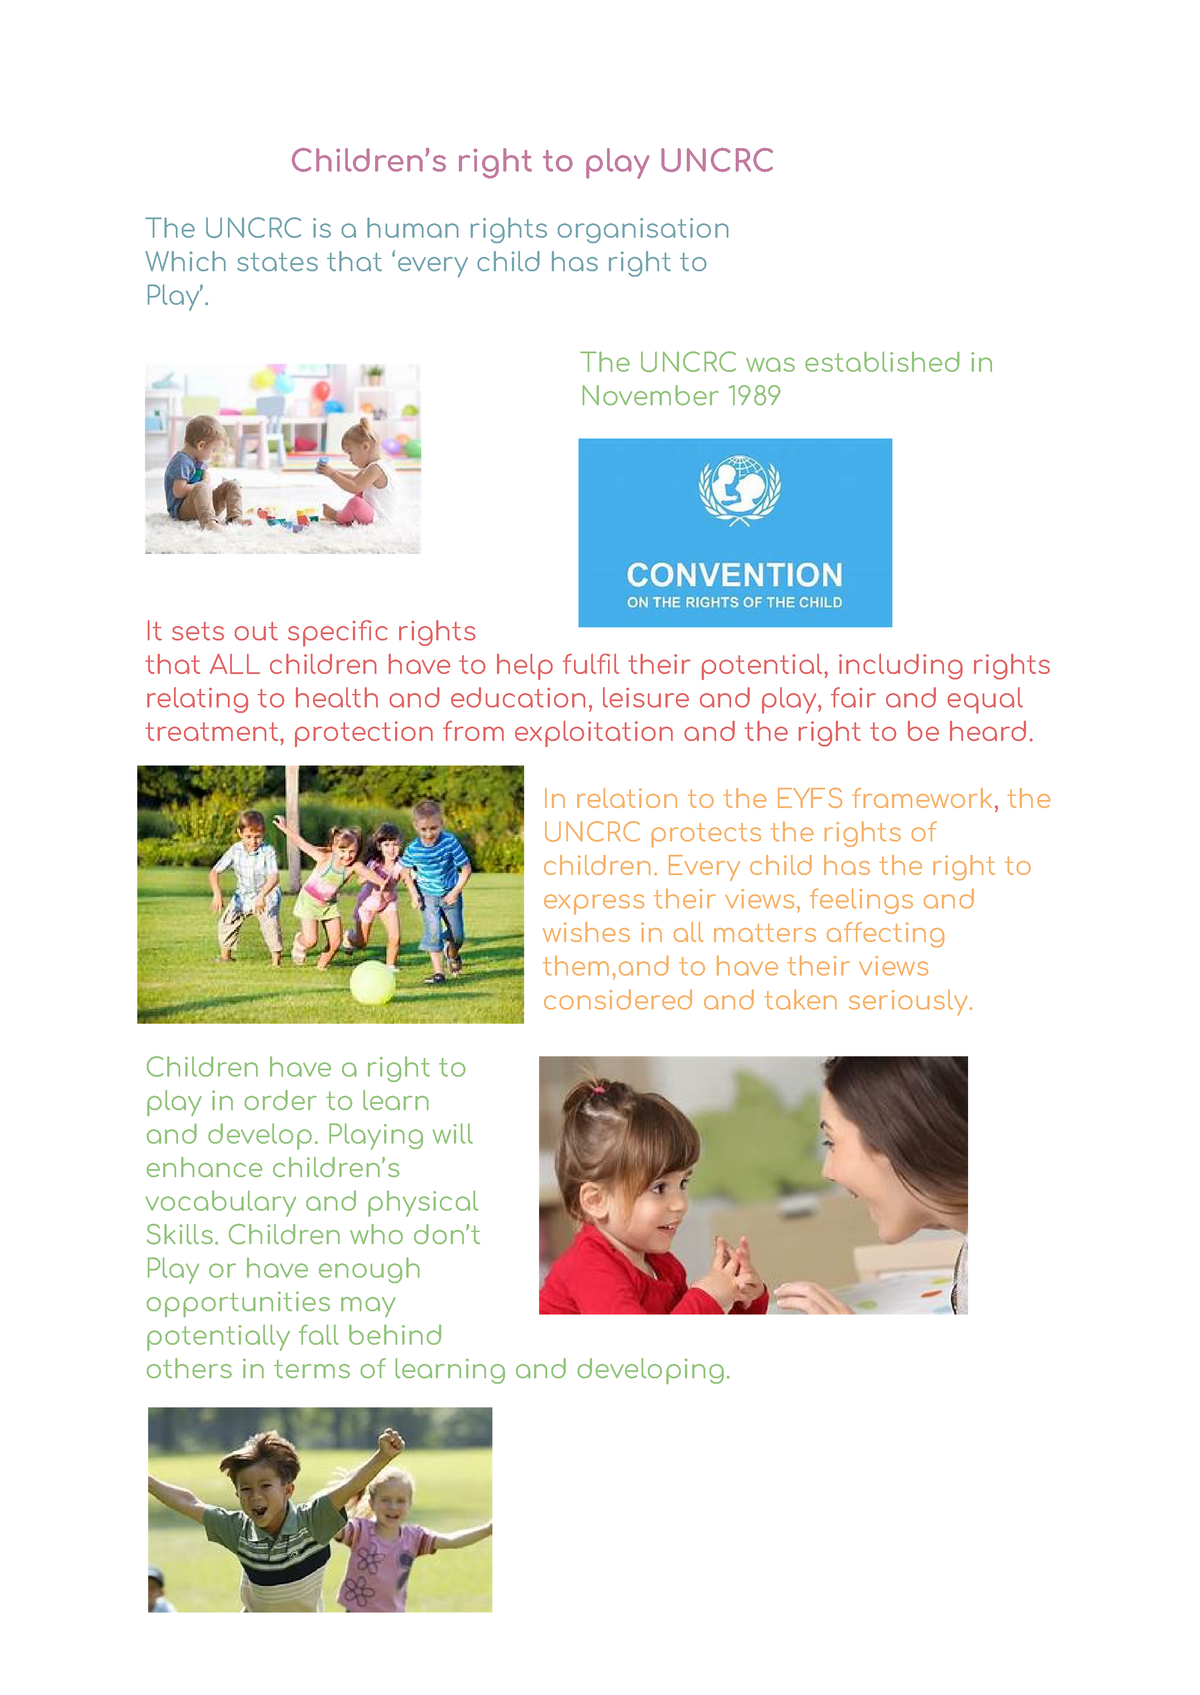 Children’s right to play - Children’s right to play UNCRC The UNCRC is ...